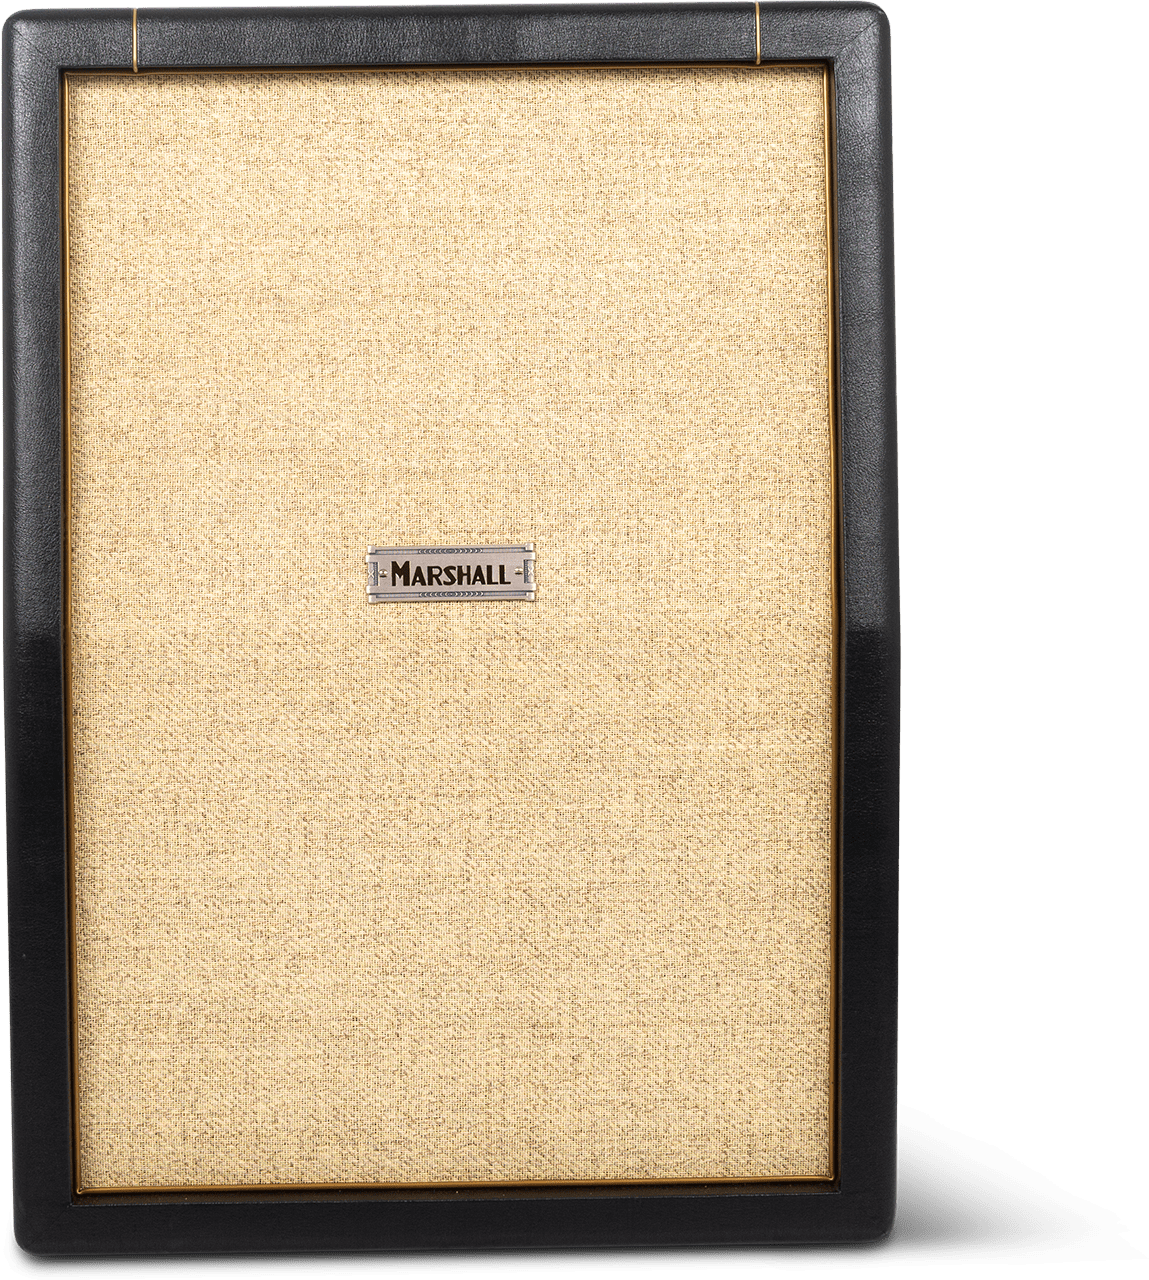 Marshall St212 Studio Cab 130w 2x12 - Electric guitar amp cabinet - Main picture